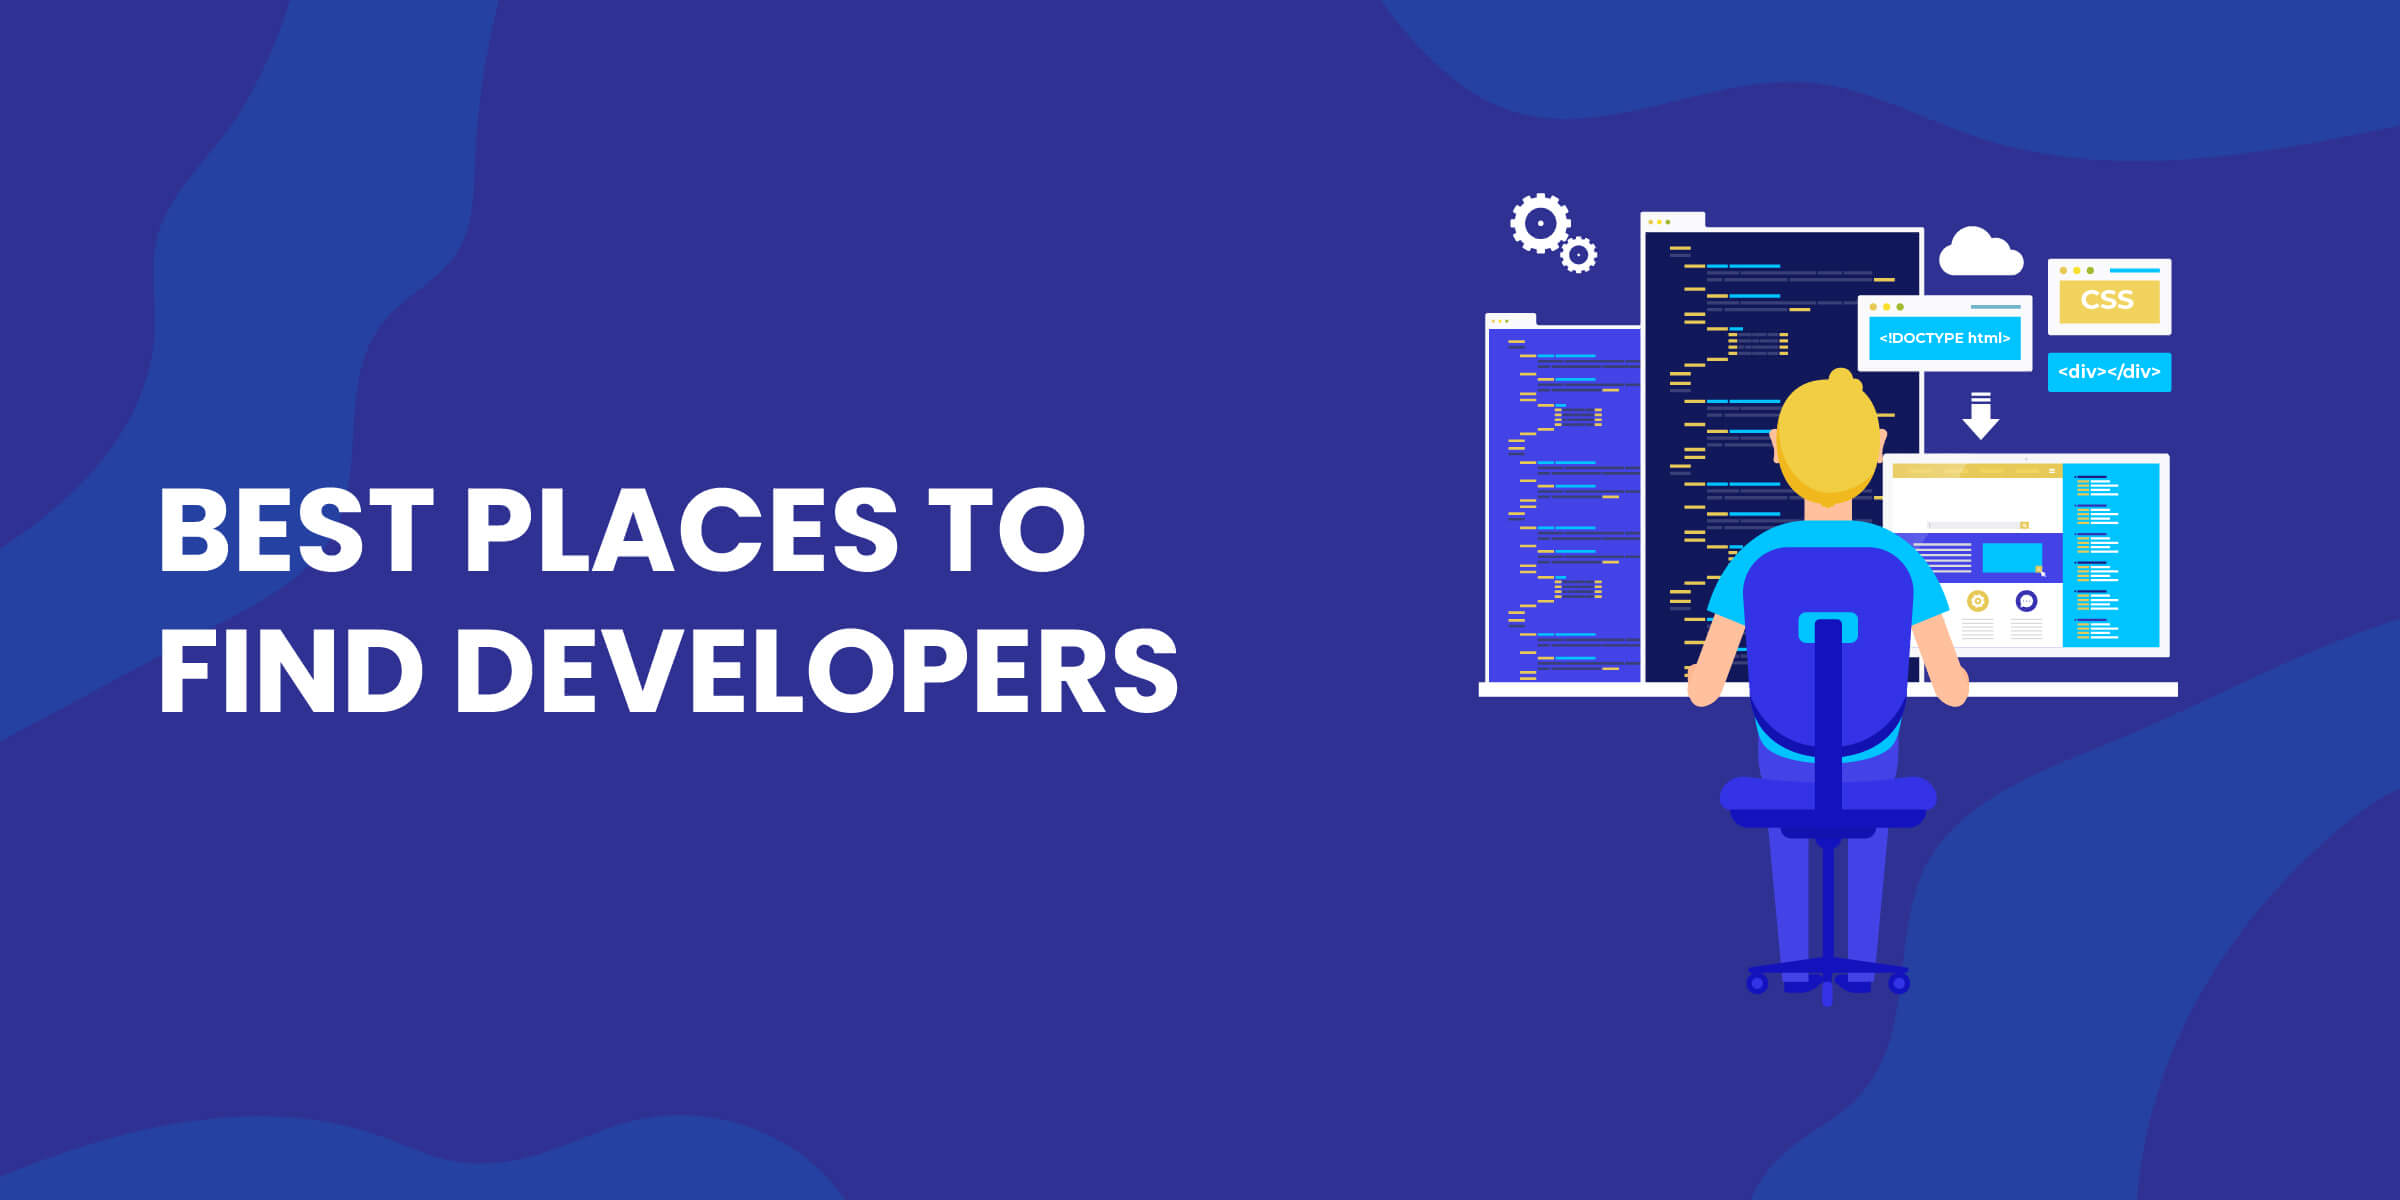 Best Places to Find Developers